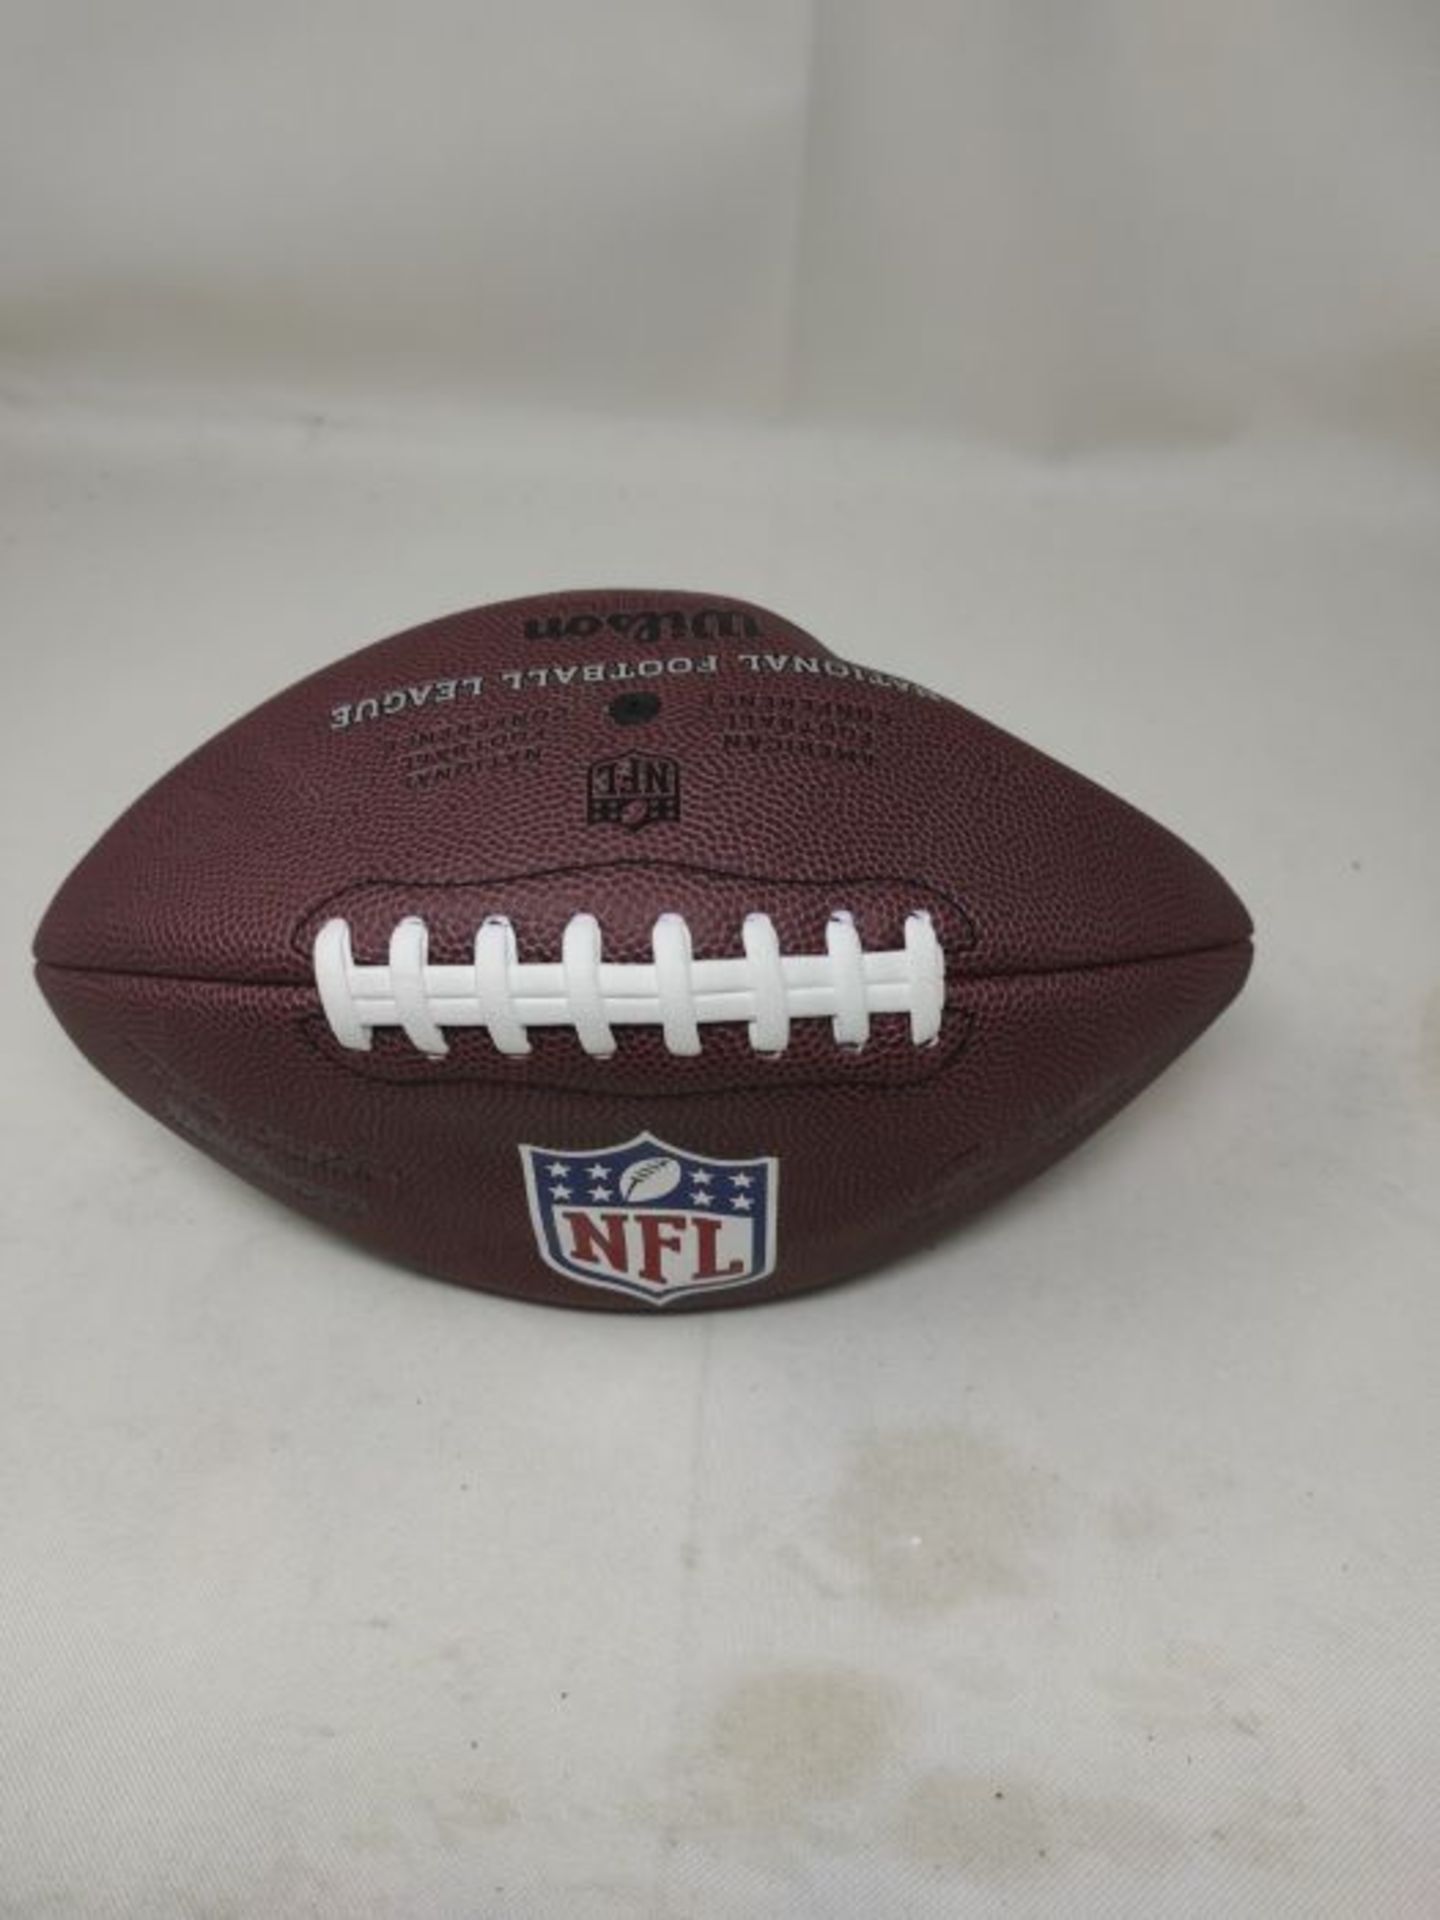 Wilson NFL DUKE REPLICA American Football, Mixed Leather, Official Size, Brown, WTF182 - Image 2 of 2